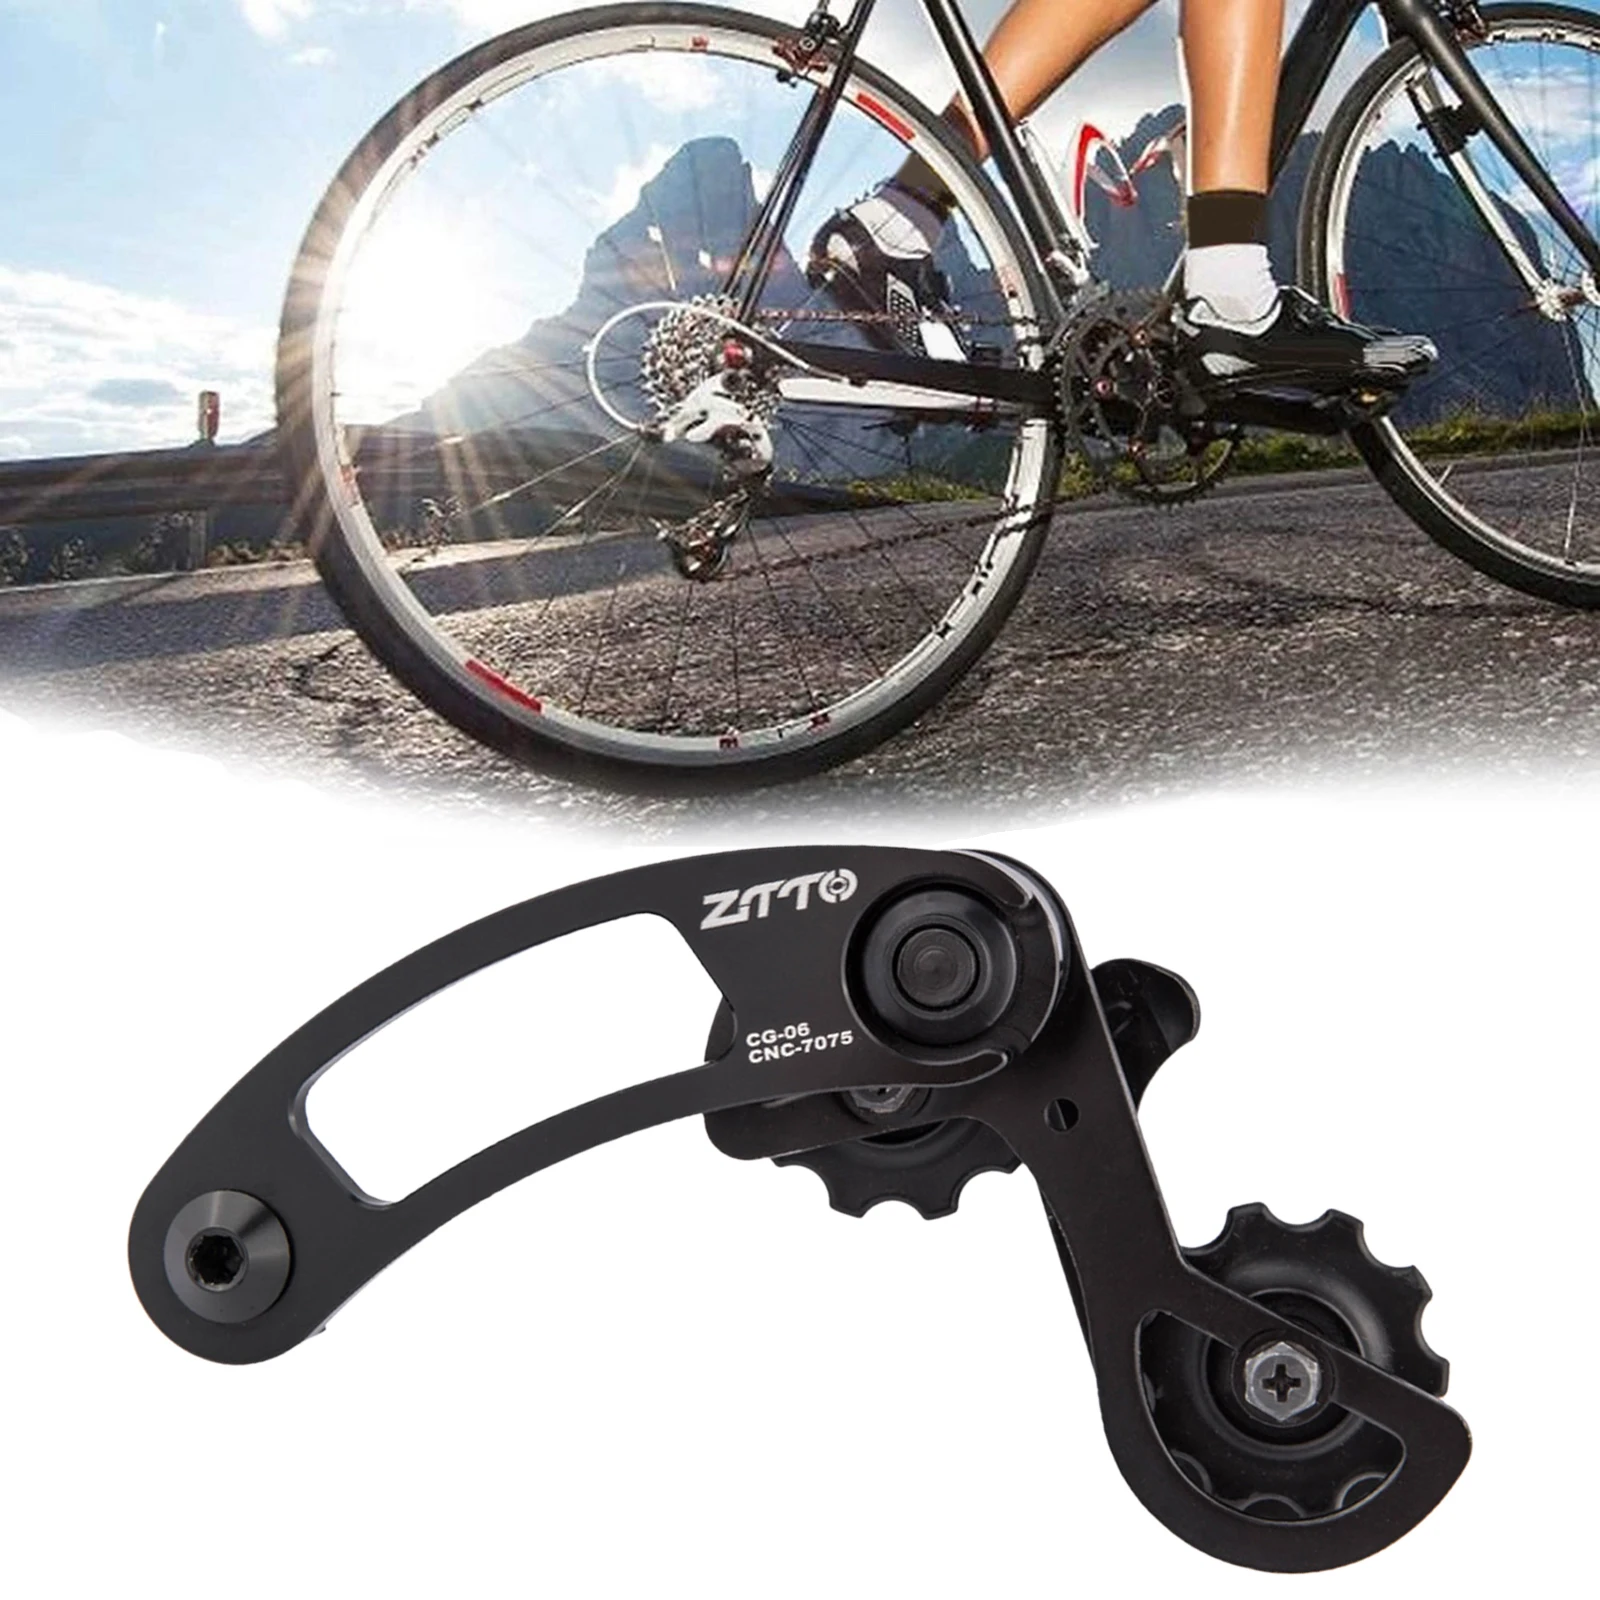 Bike Single Speed Chain Tensioner for Road Bike MTB Bicycle Cycling - Performance Aluminum Alloy - Easy Installation